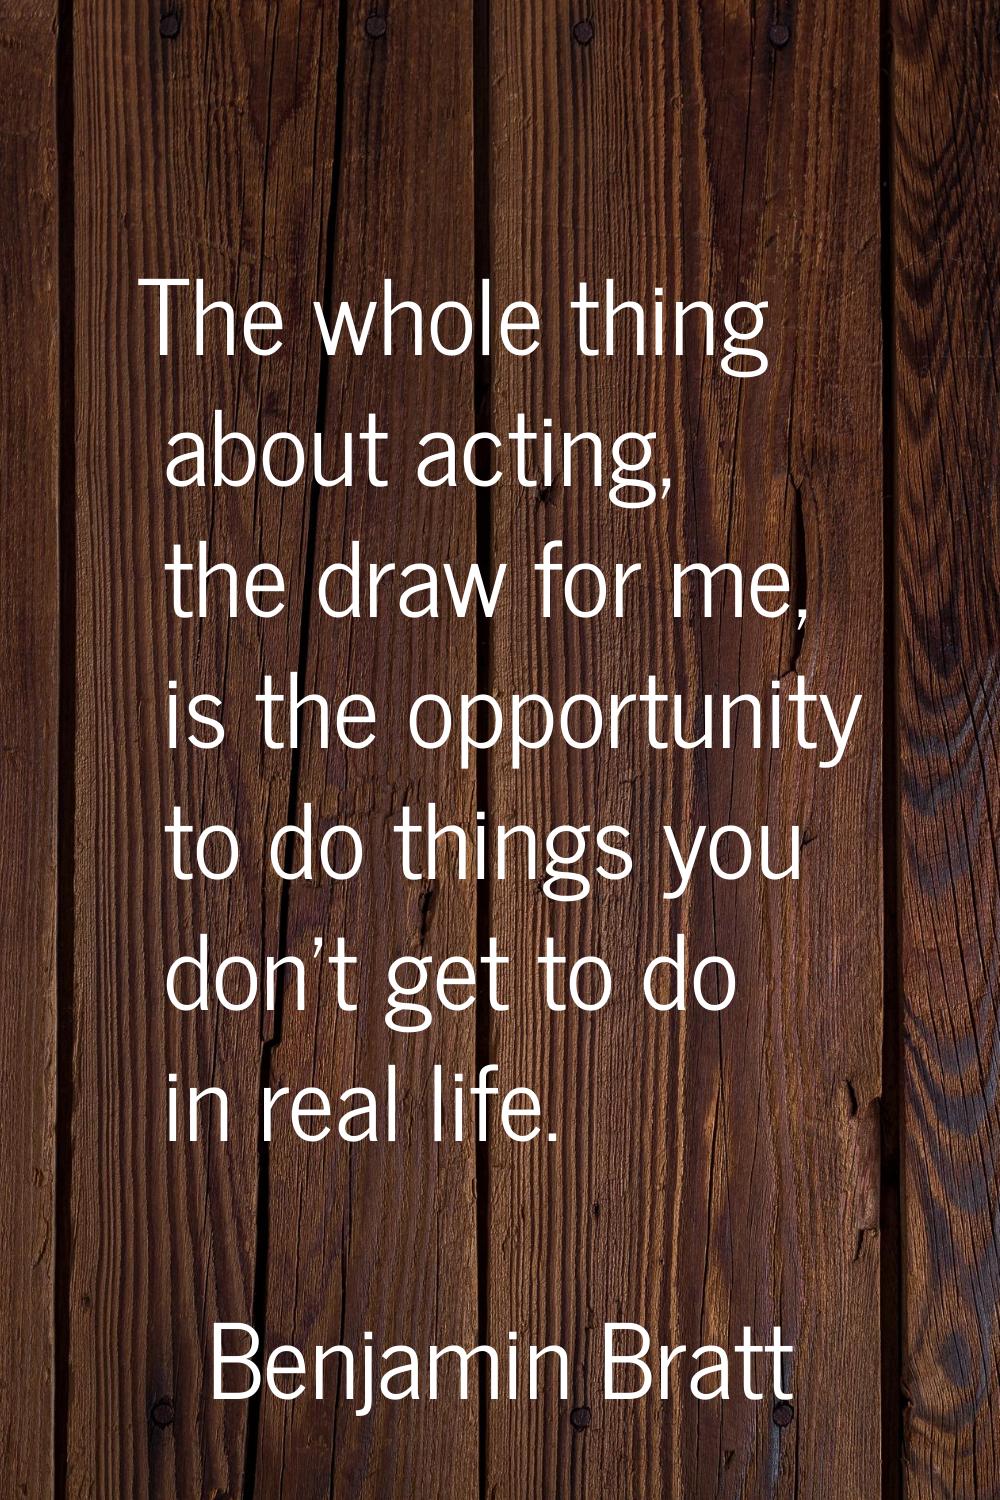 The whole thing about acting, the draw for me, is the opportunity to do things you don't get to do 